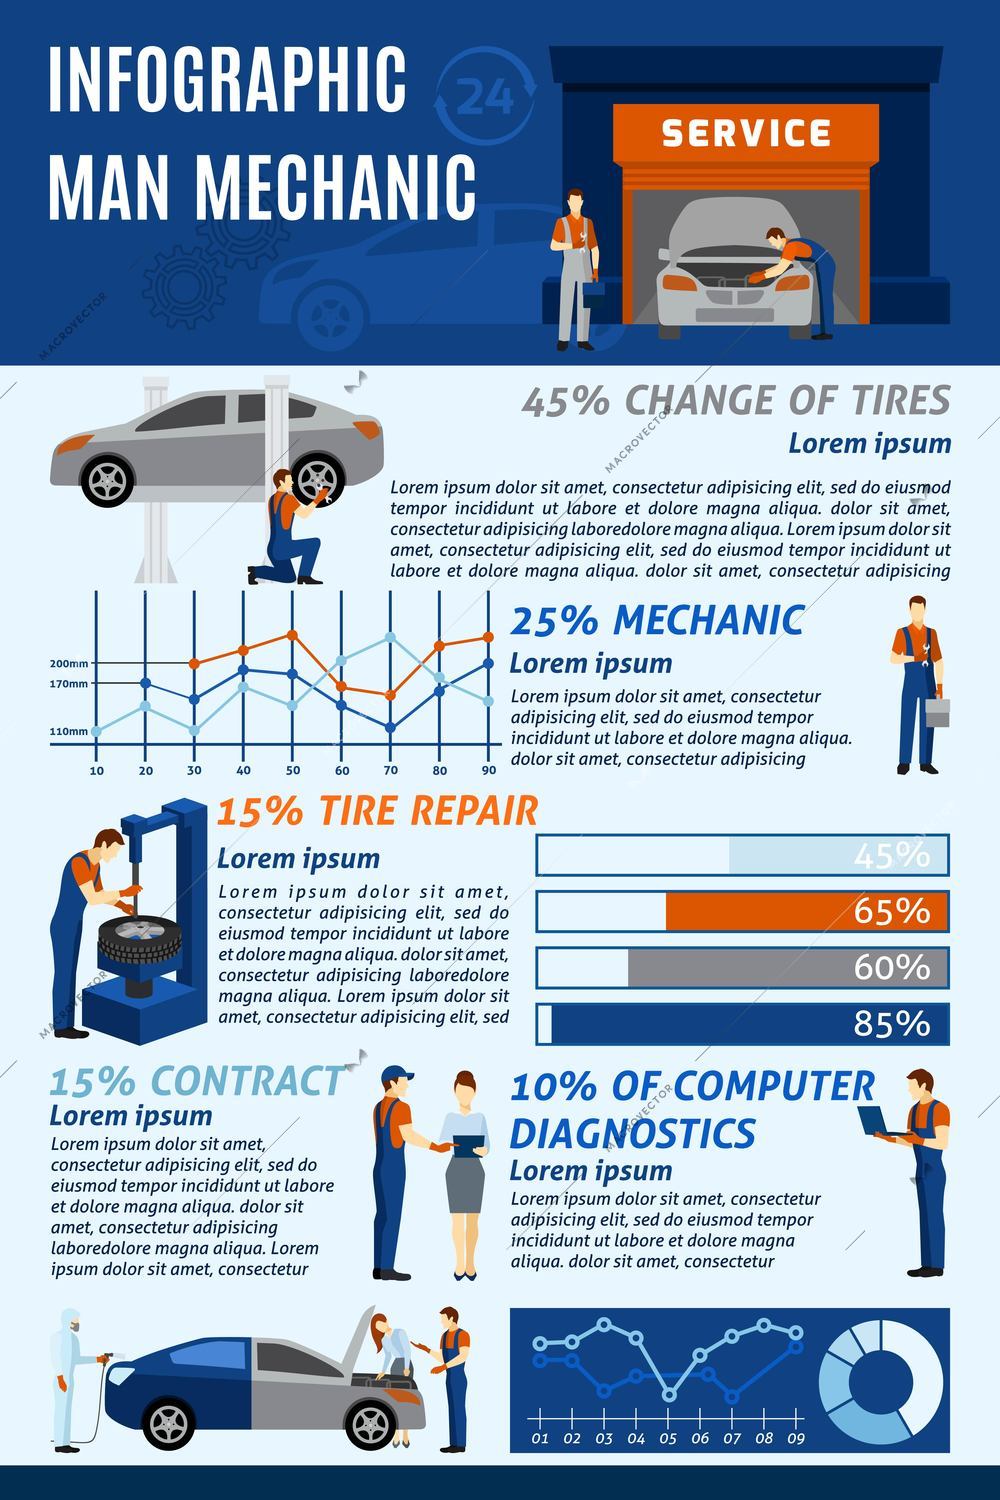 Automotive technician car mechanic computer diagnostic and full service contract benefits infographic  presentation layout abstract vector illustration